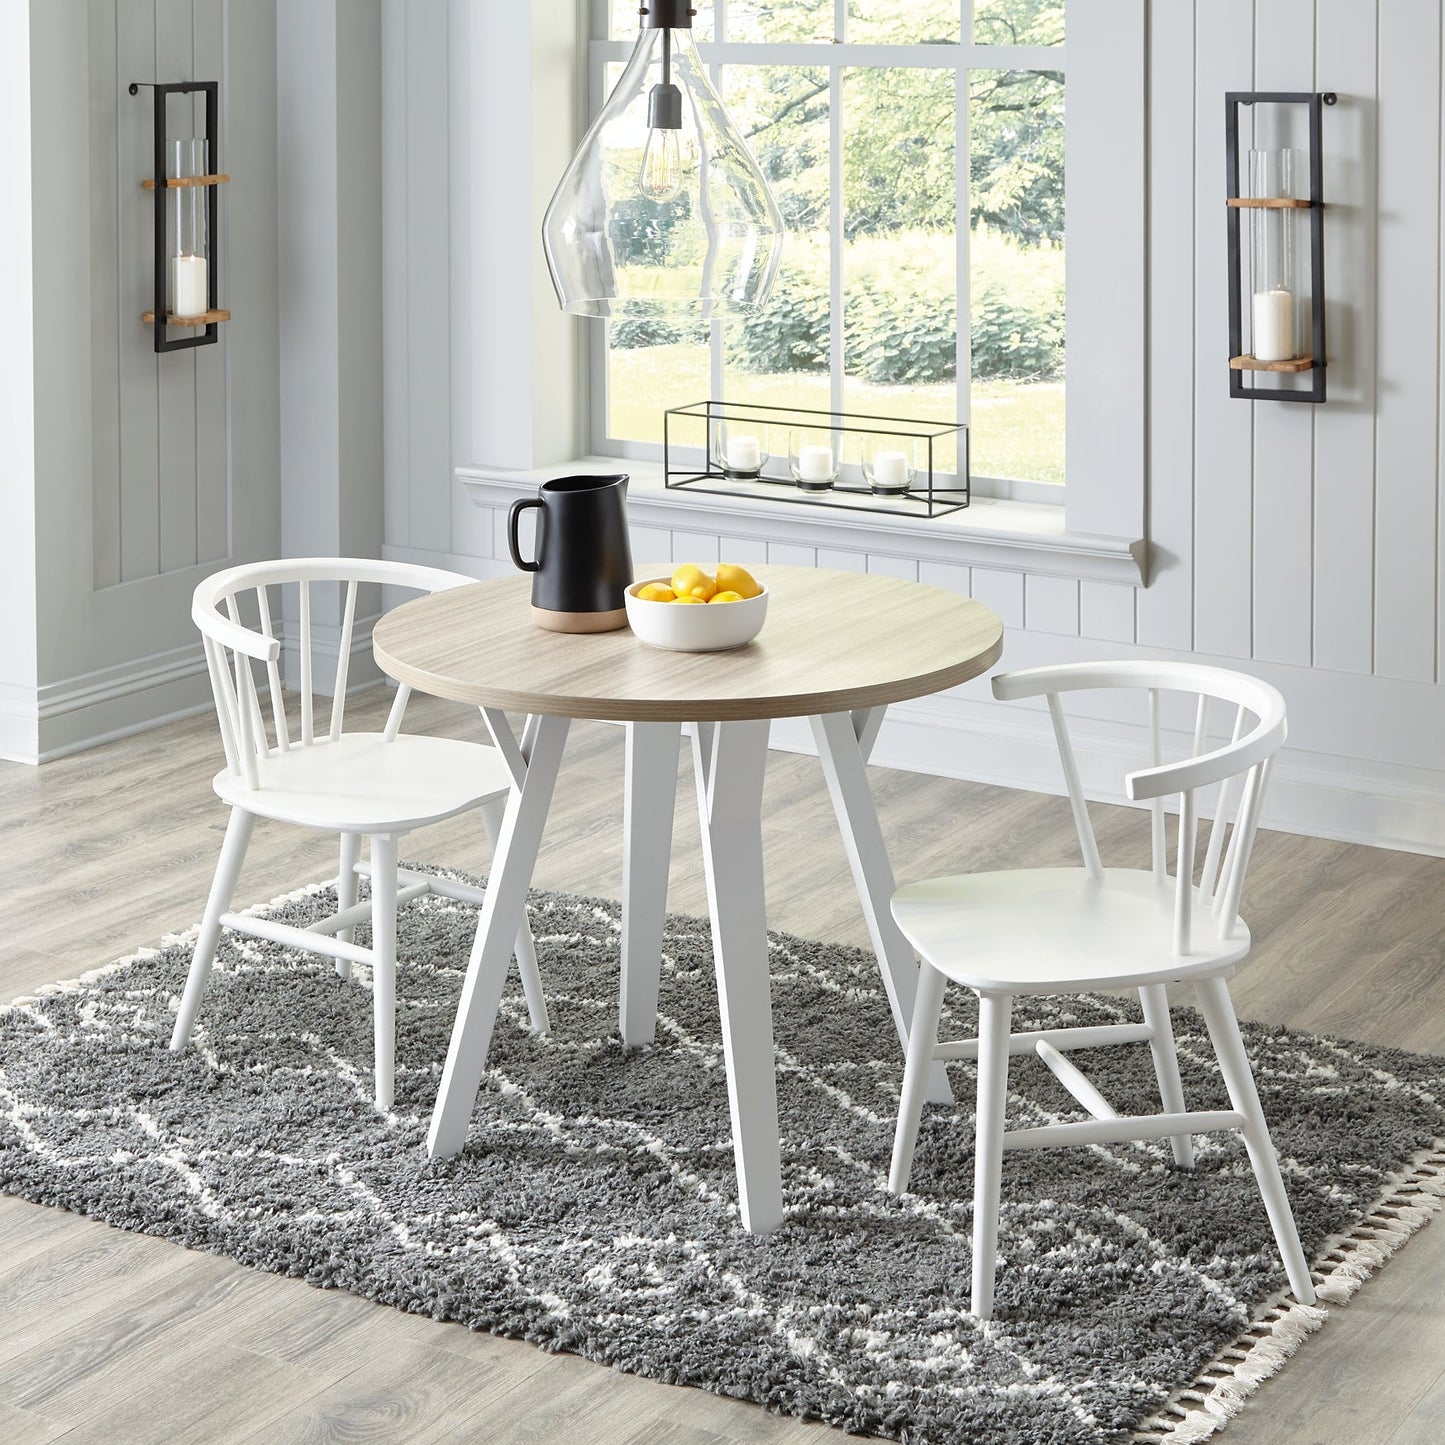 Grannen Dining Table and 2 Chairs at Cloud 9 Mattress & Furniture furniture, home furnishing, home decor